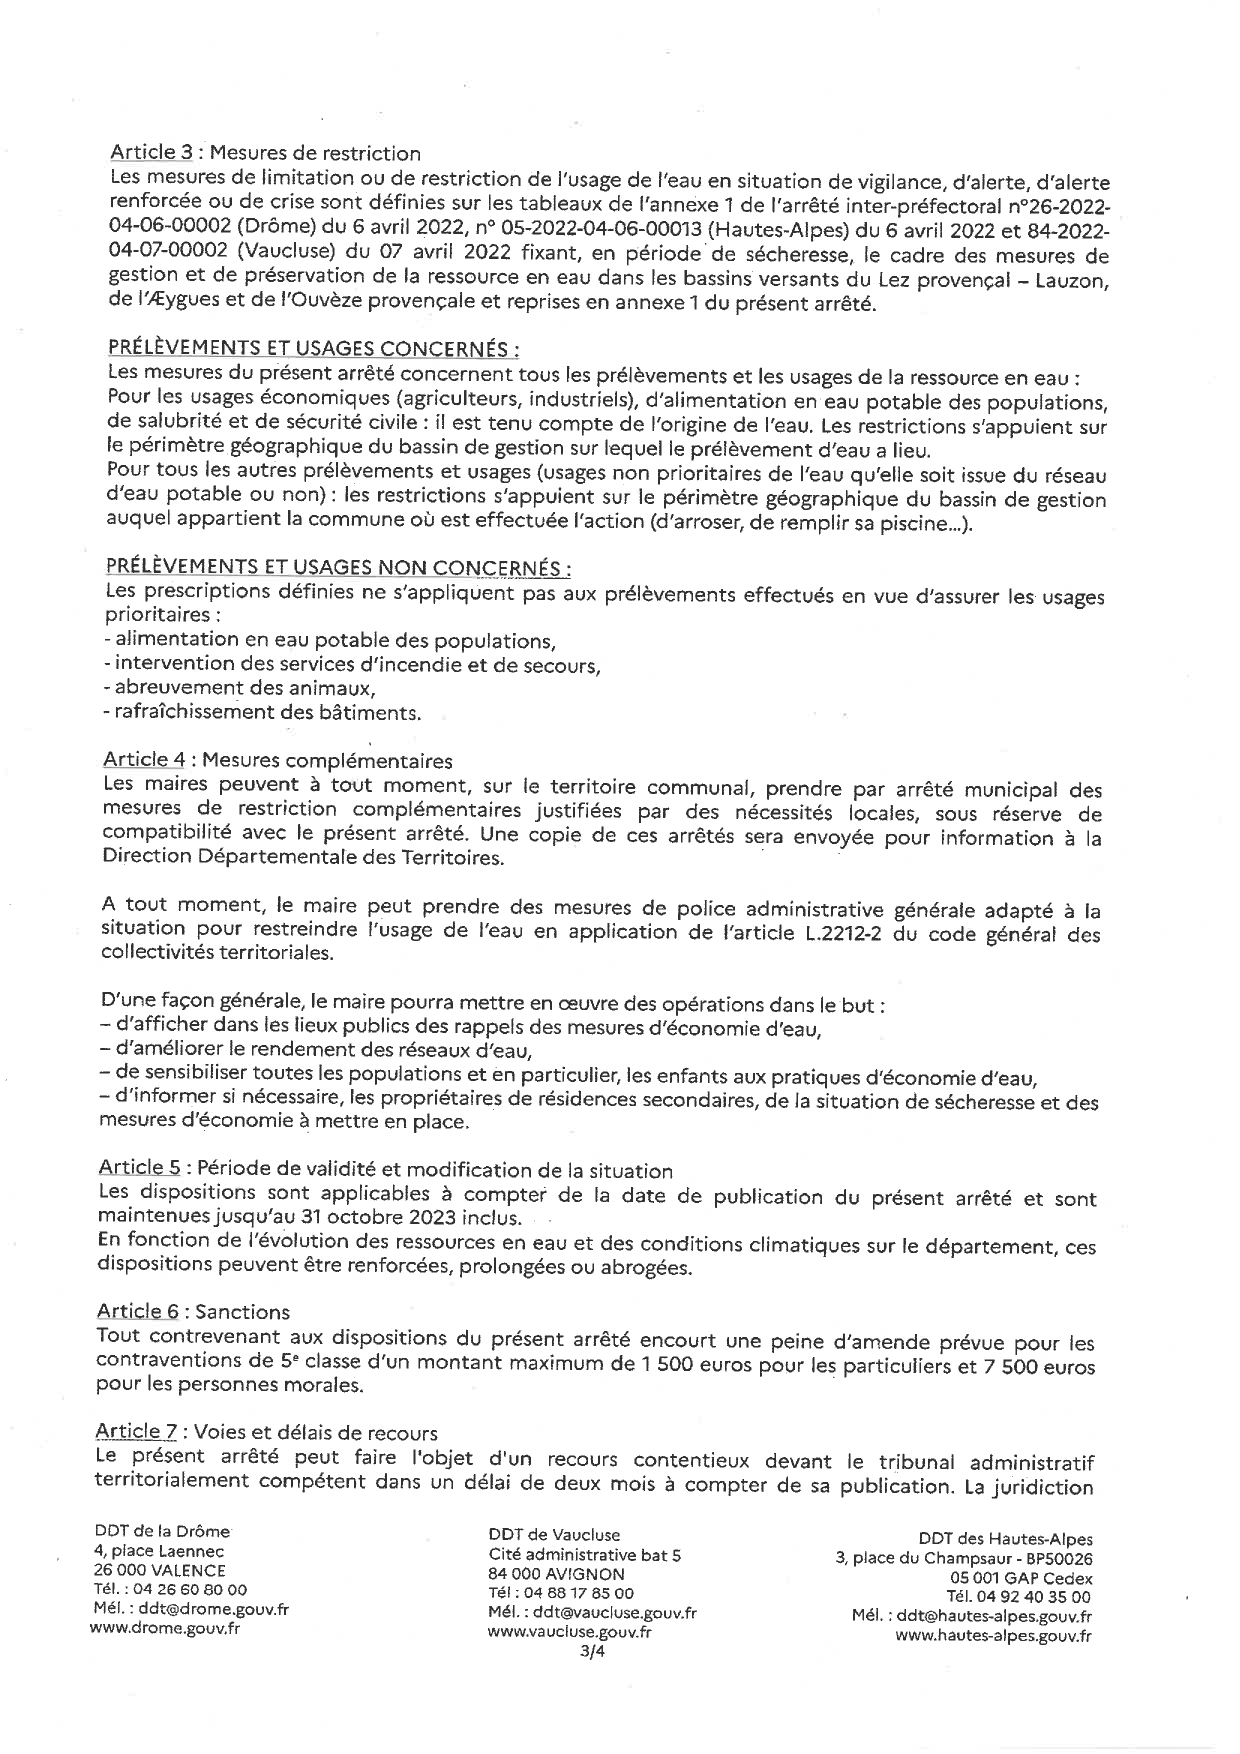 AIP 26-05-84_Restriction eau Aeygues_page-0003